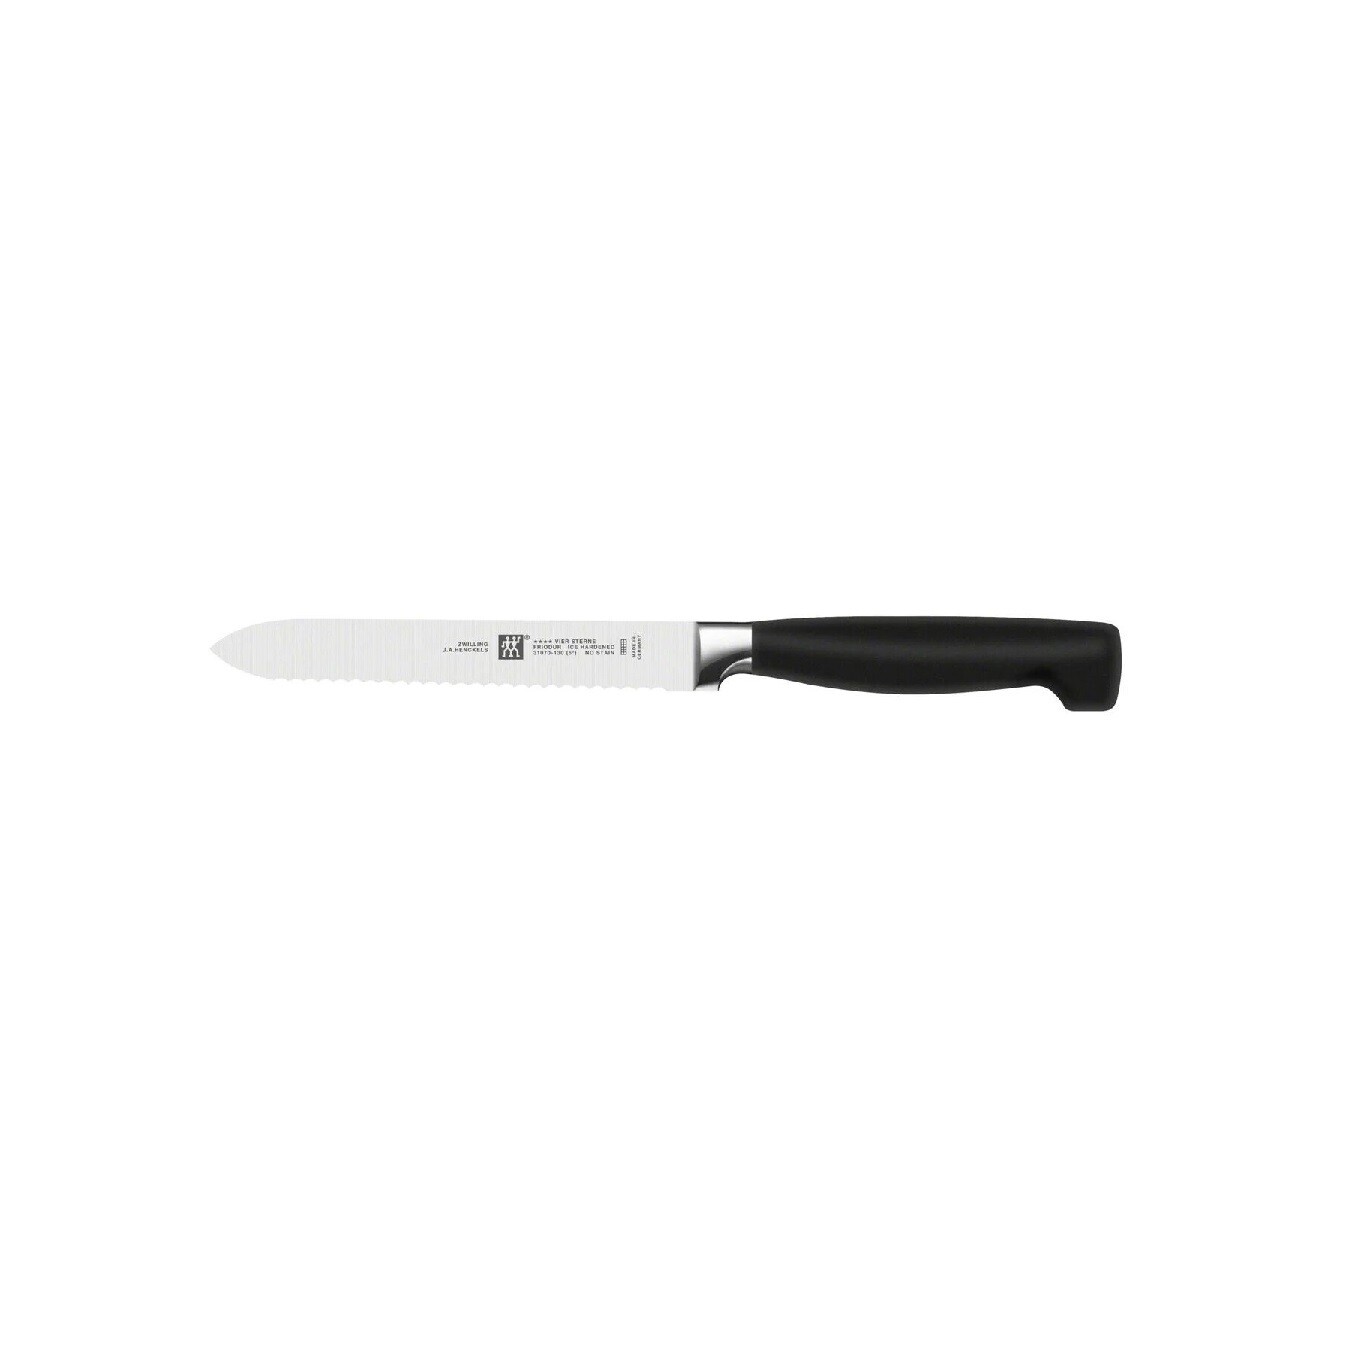 ZWILLING 'four star' universeel mes 130mm  PROMO 53,95 -25%